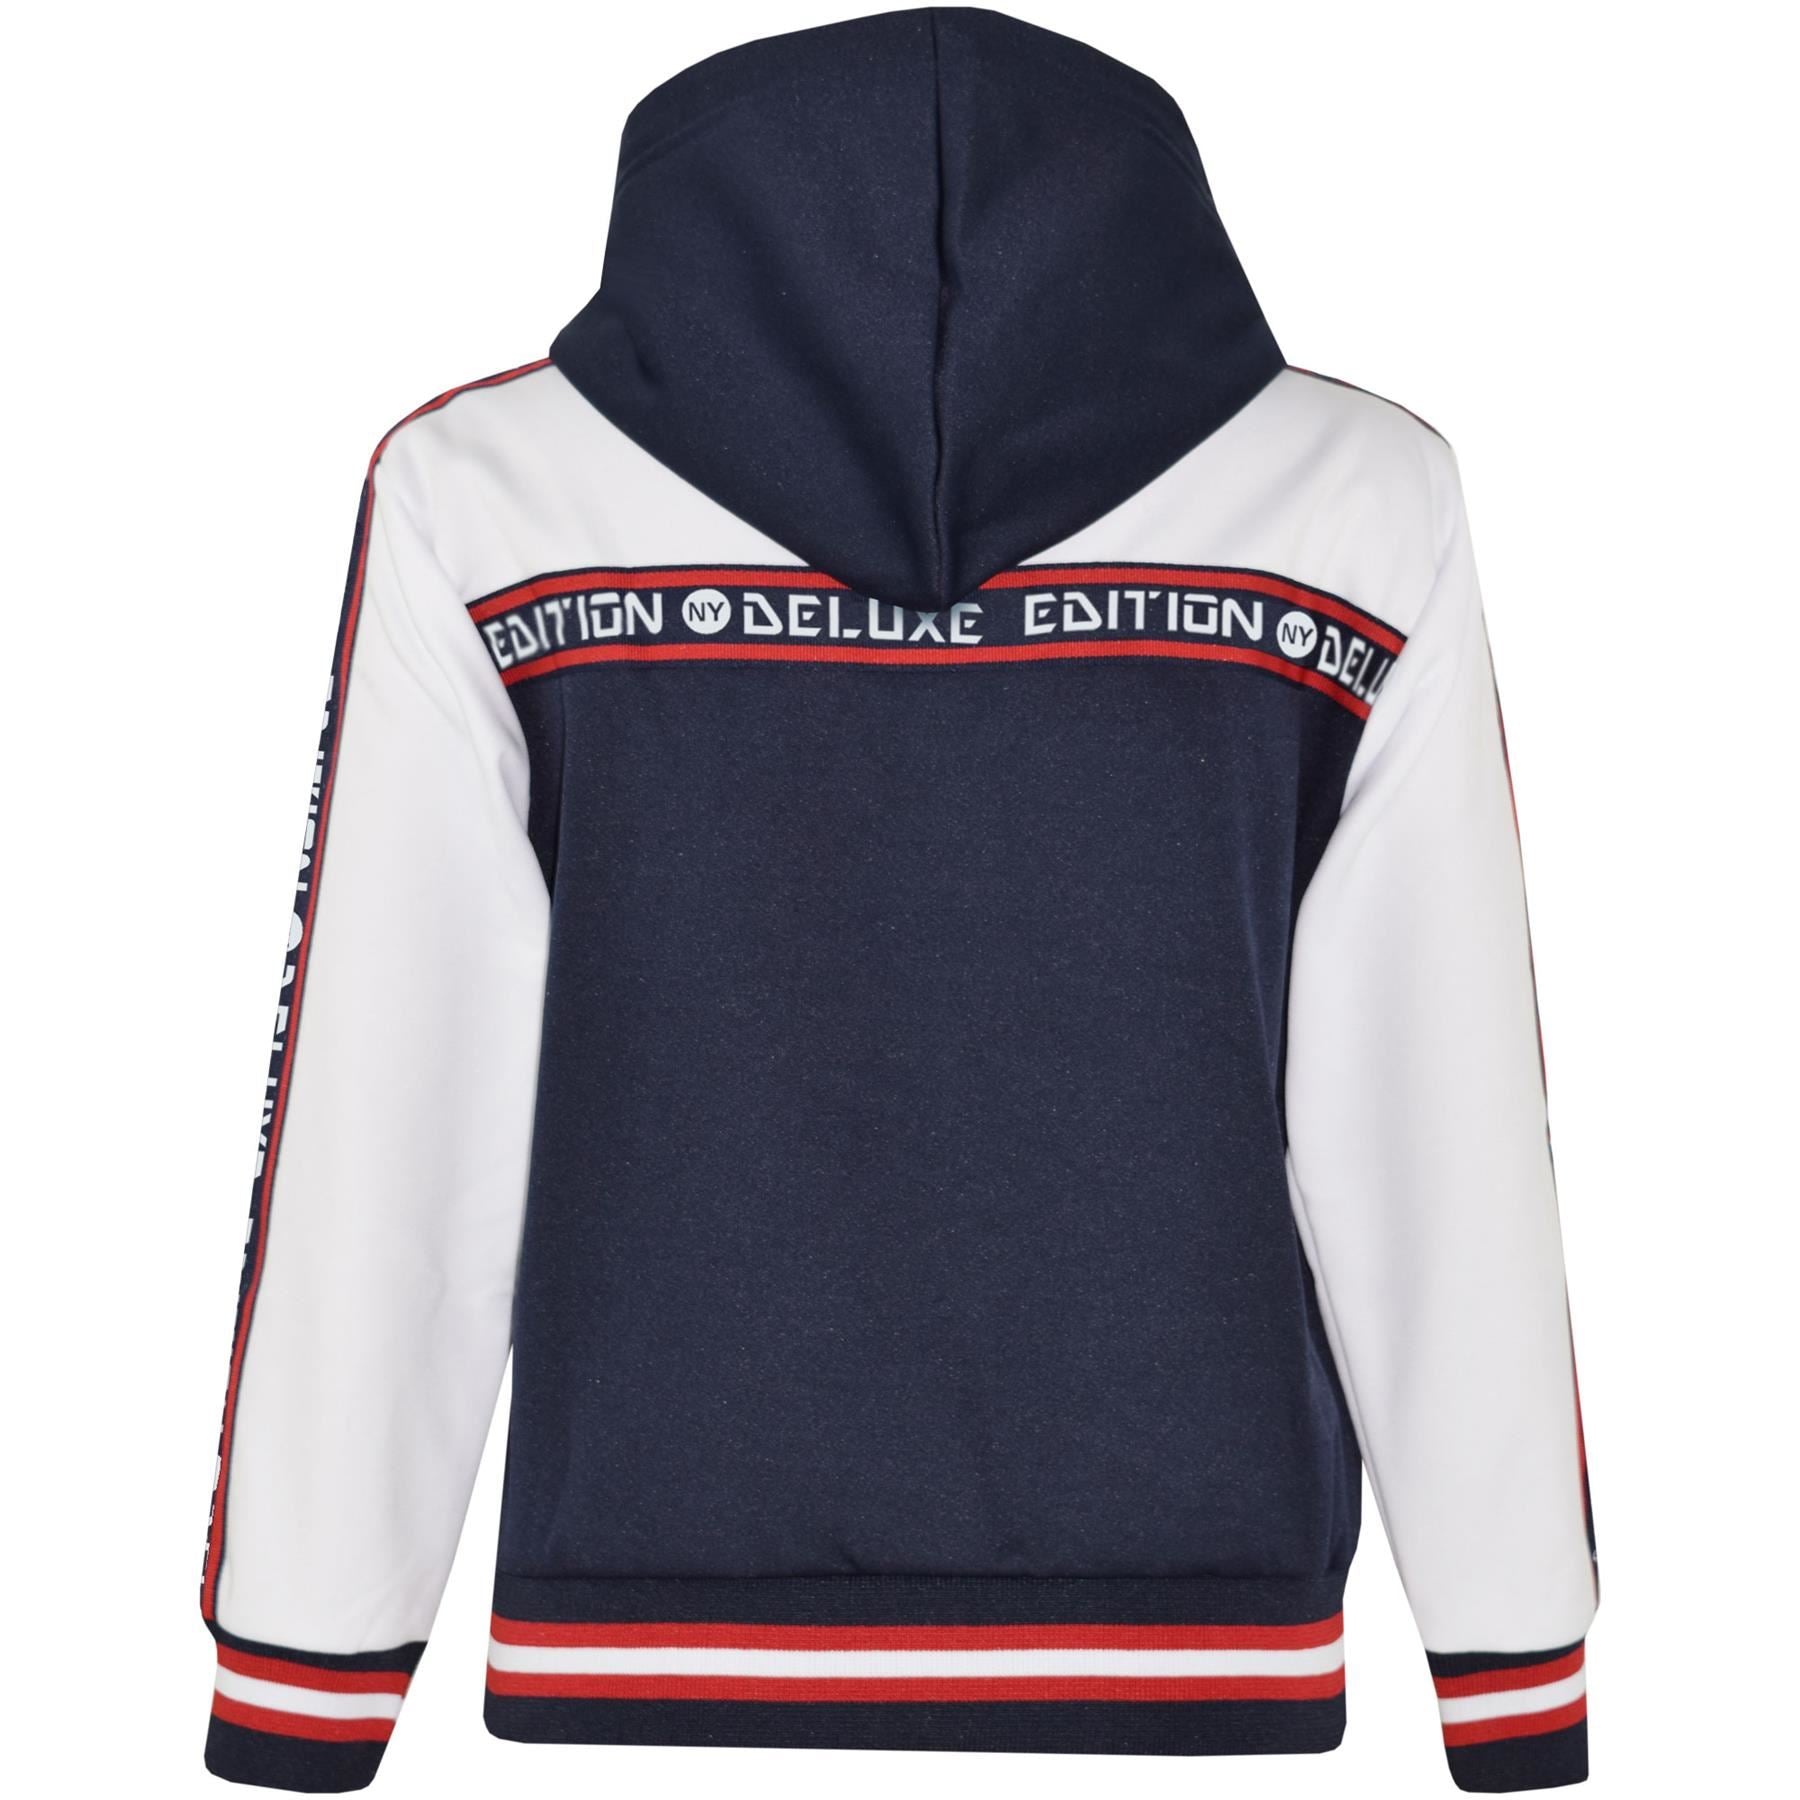 Girls Boys Unisex NY Navy Deluxe Edition Taped Hooded Tracksuit